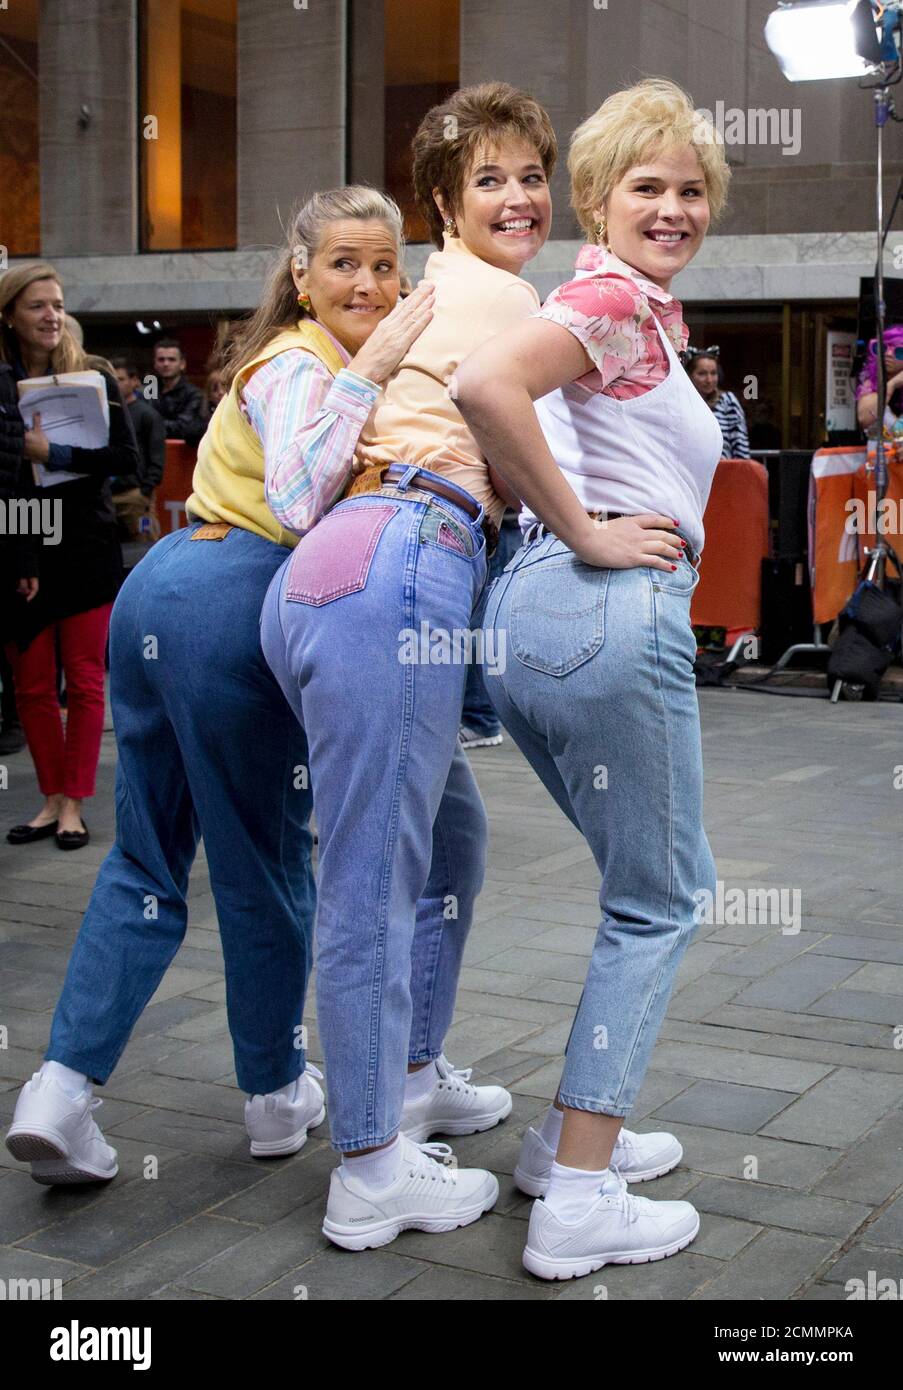 Hosts from L-R: Meredith Vieira, Savannah Guthrie and Jenna Bush Hager  dress as Saturday Night Live characters' "Mom Jeans" during NBC's "Today"  show's "Halloween Boo-Nanza" in New York October 31, 2014. REUTERS/Brendan